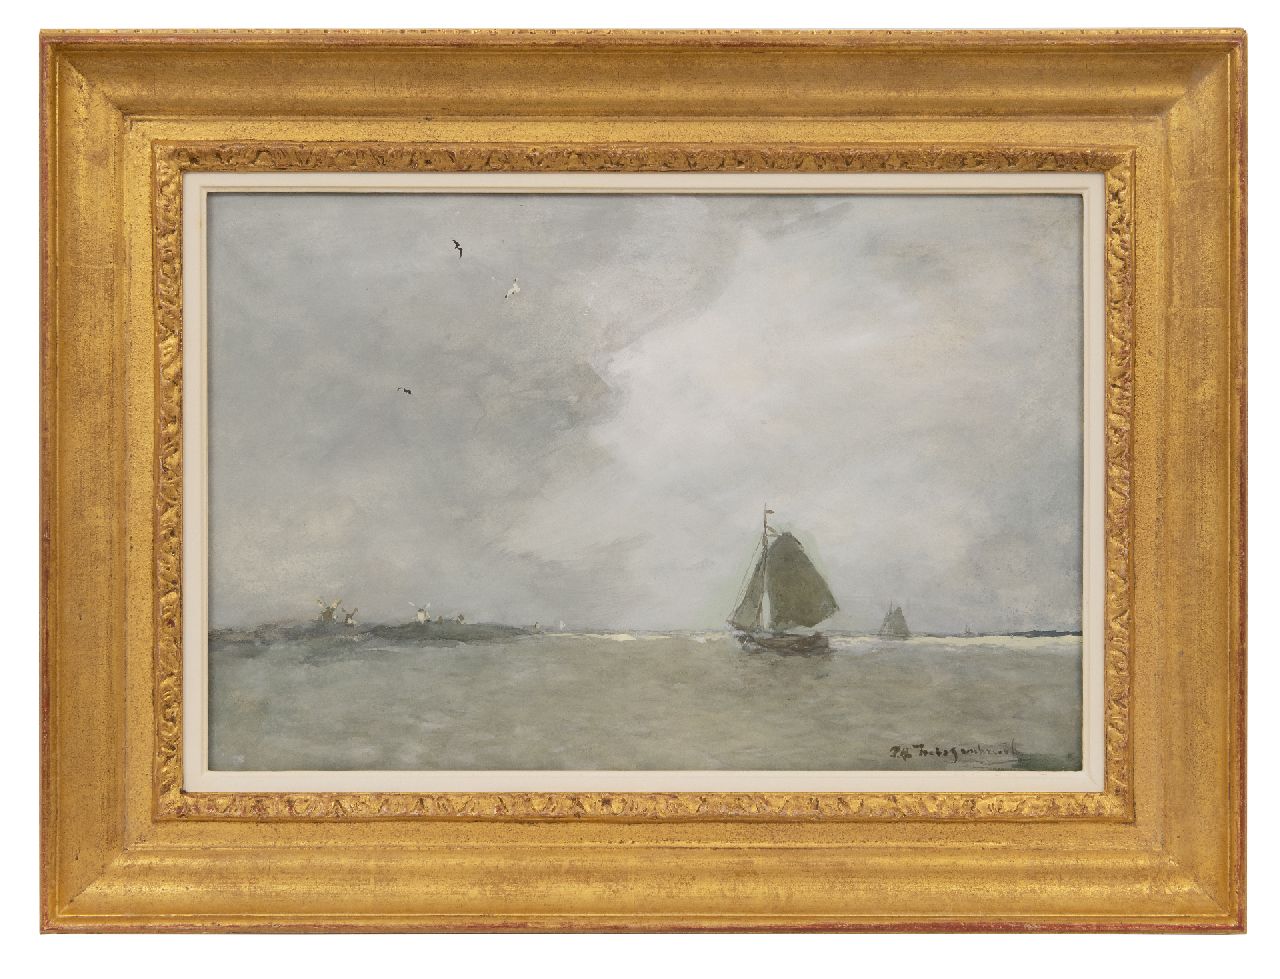 Weissenbruch H.J.  | Hendrik Johannes 'J.H.' Weissenbruch | Watercolours and drawings offered for sale | Sailing ships on the lake, watercolour on paper 34.8 x 52.4 cm, signed l.r.